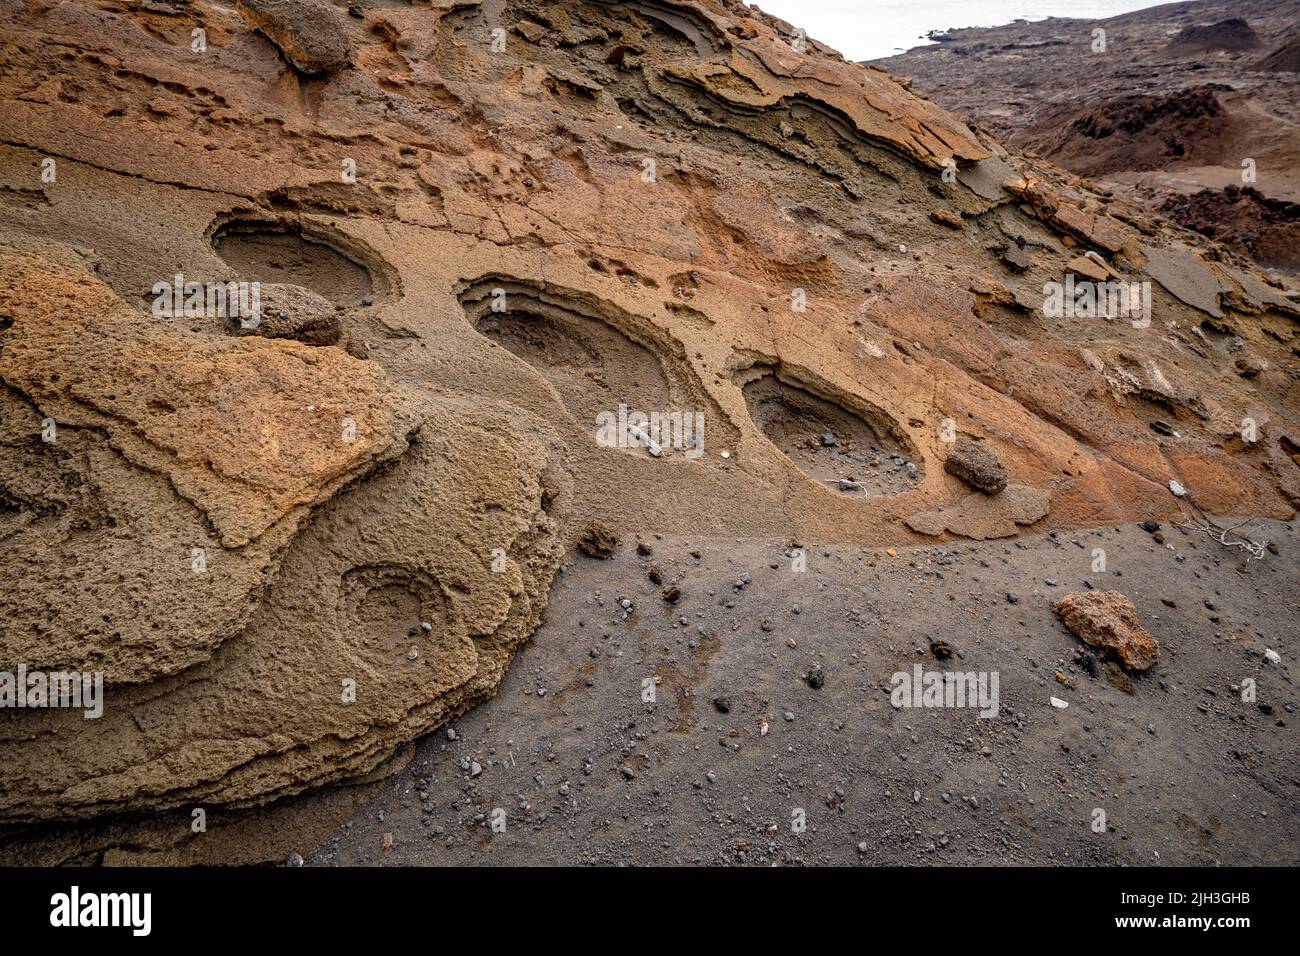 Volcanic landscape looks like craters on the moon on Bartolome Island in the Galapagos Stock Photo